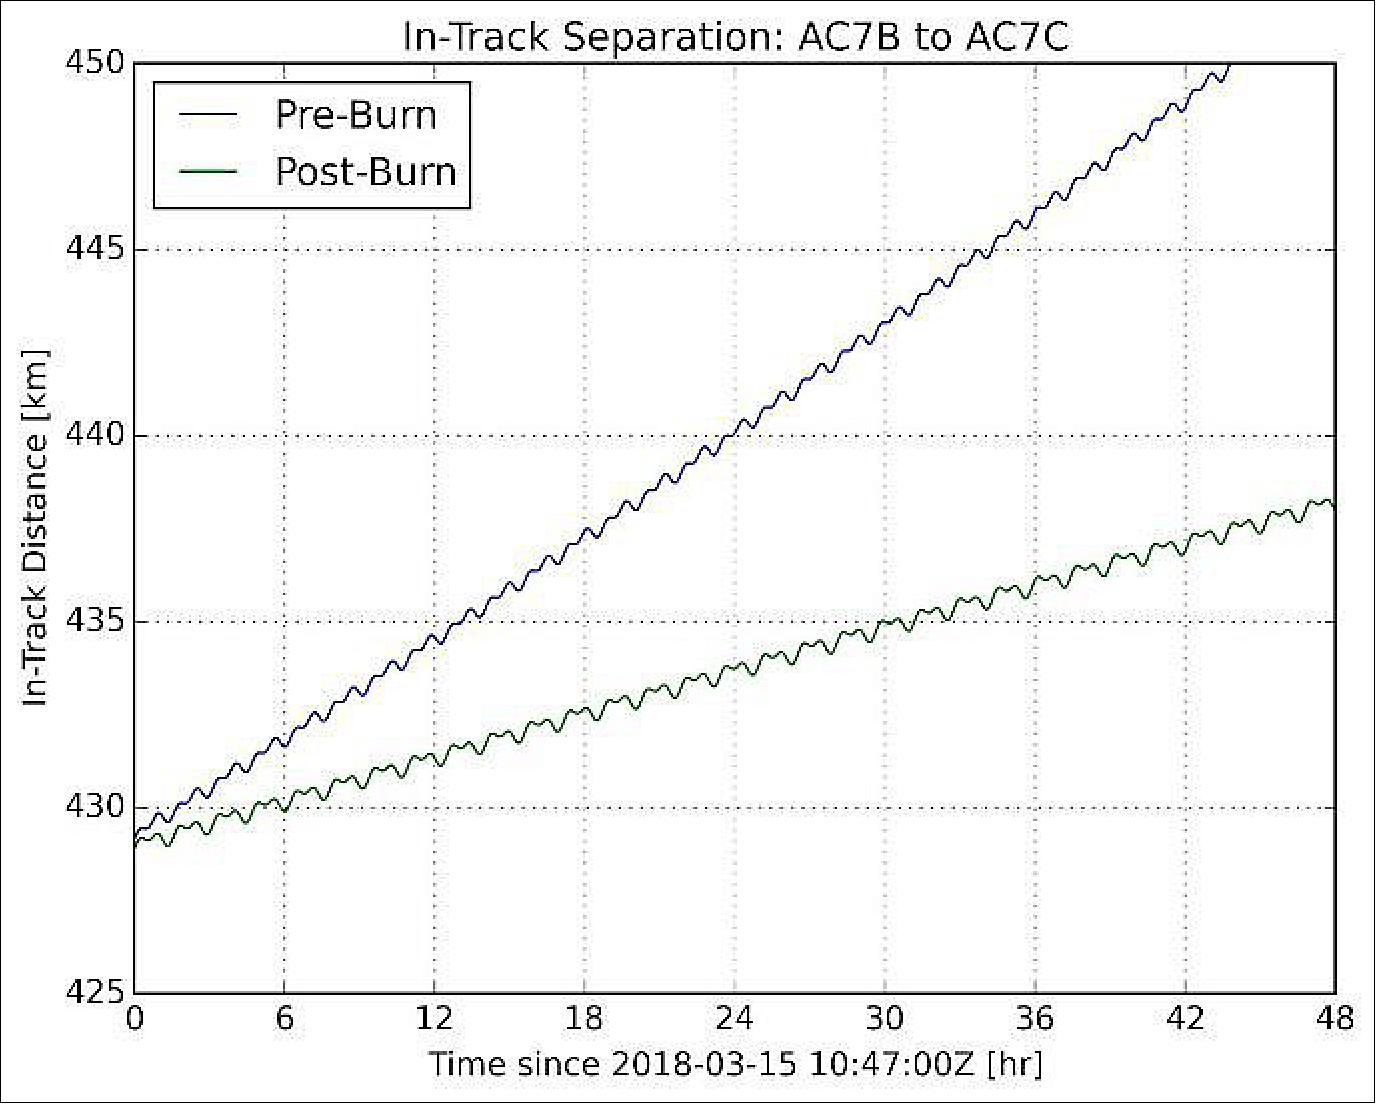 Figure 11: In-track separation between AeroCube-OCSD-B and -C based on orbital elements before and after the first proximity operations burn (image credit: The Aerospace Corporation)